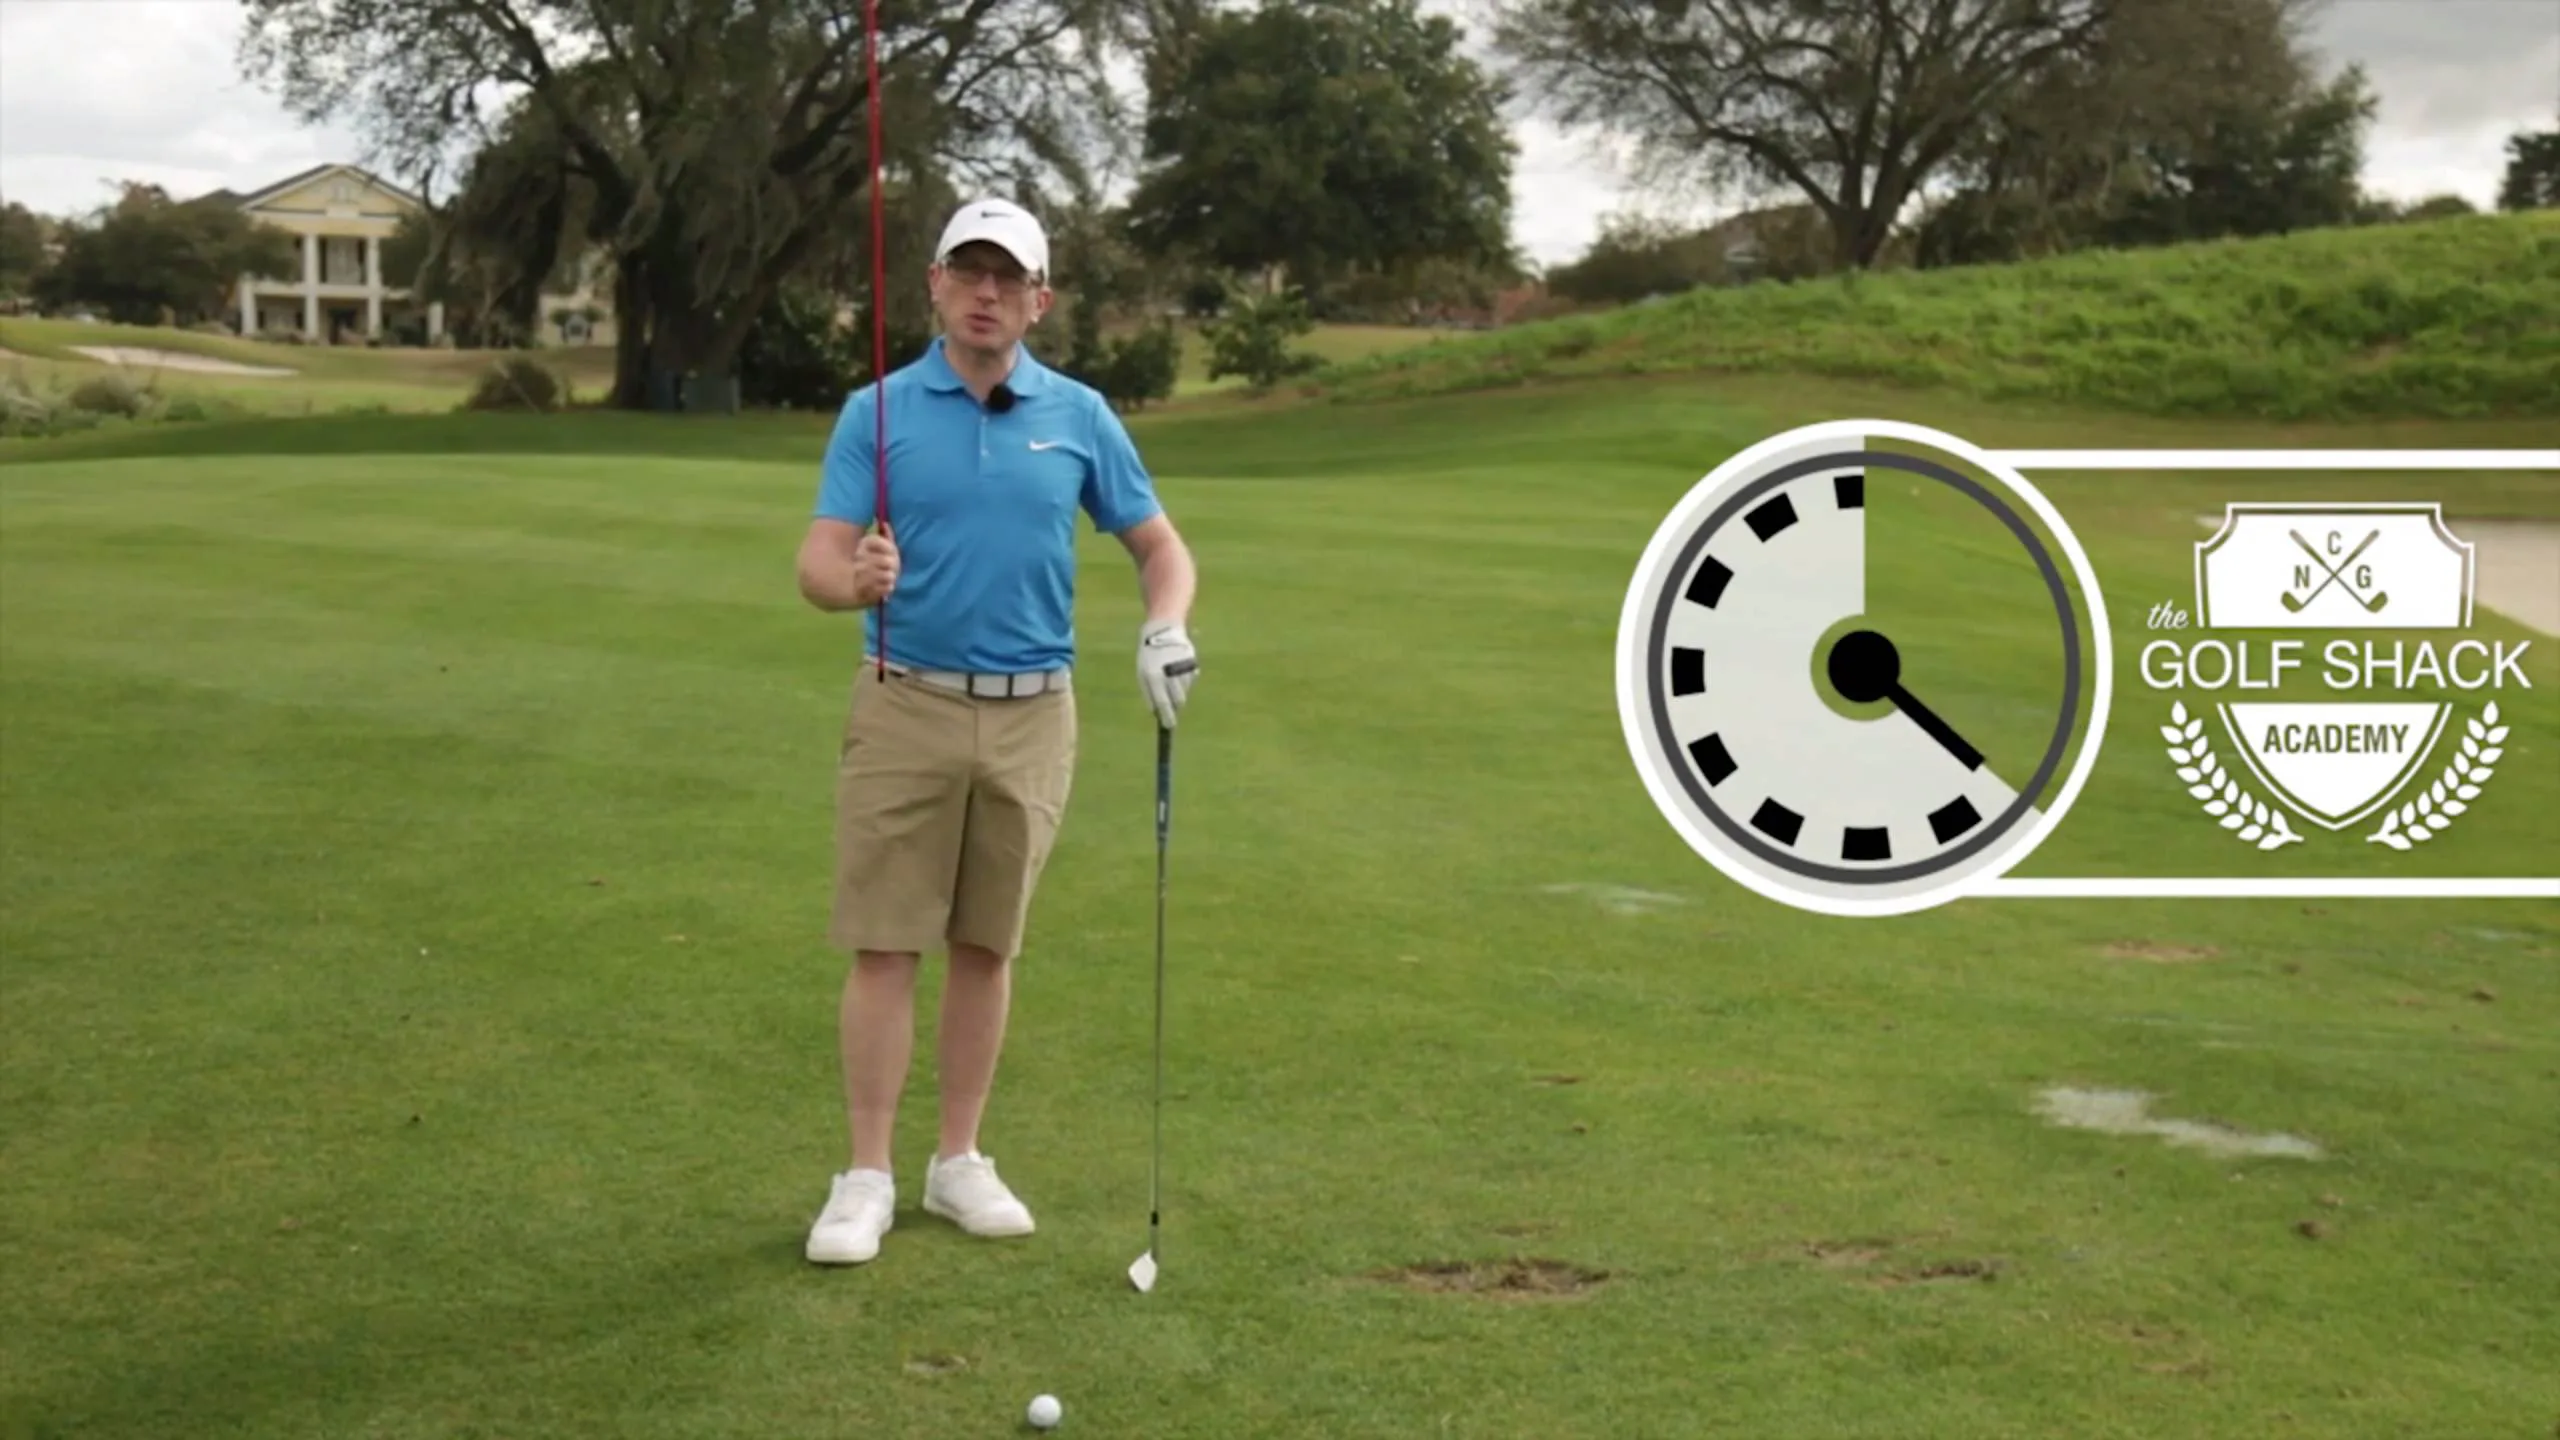 Second Hand Shorts 27: Controlling the ball flight